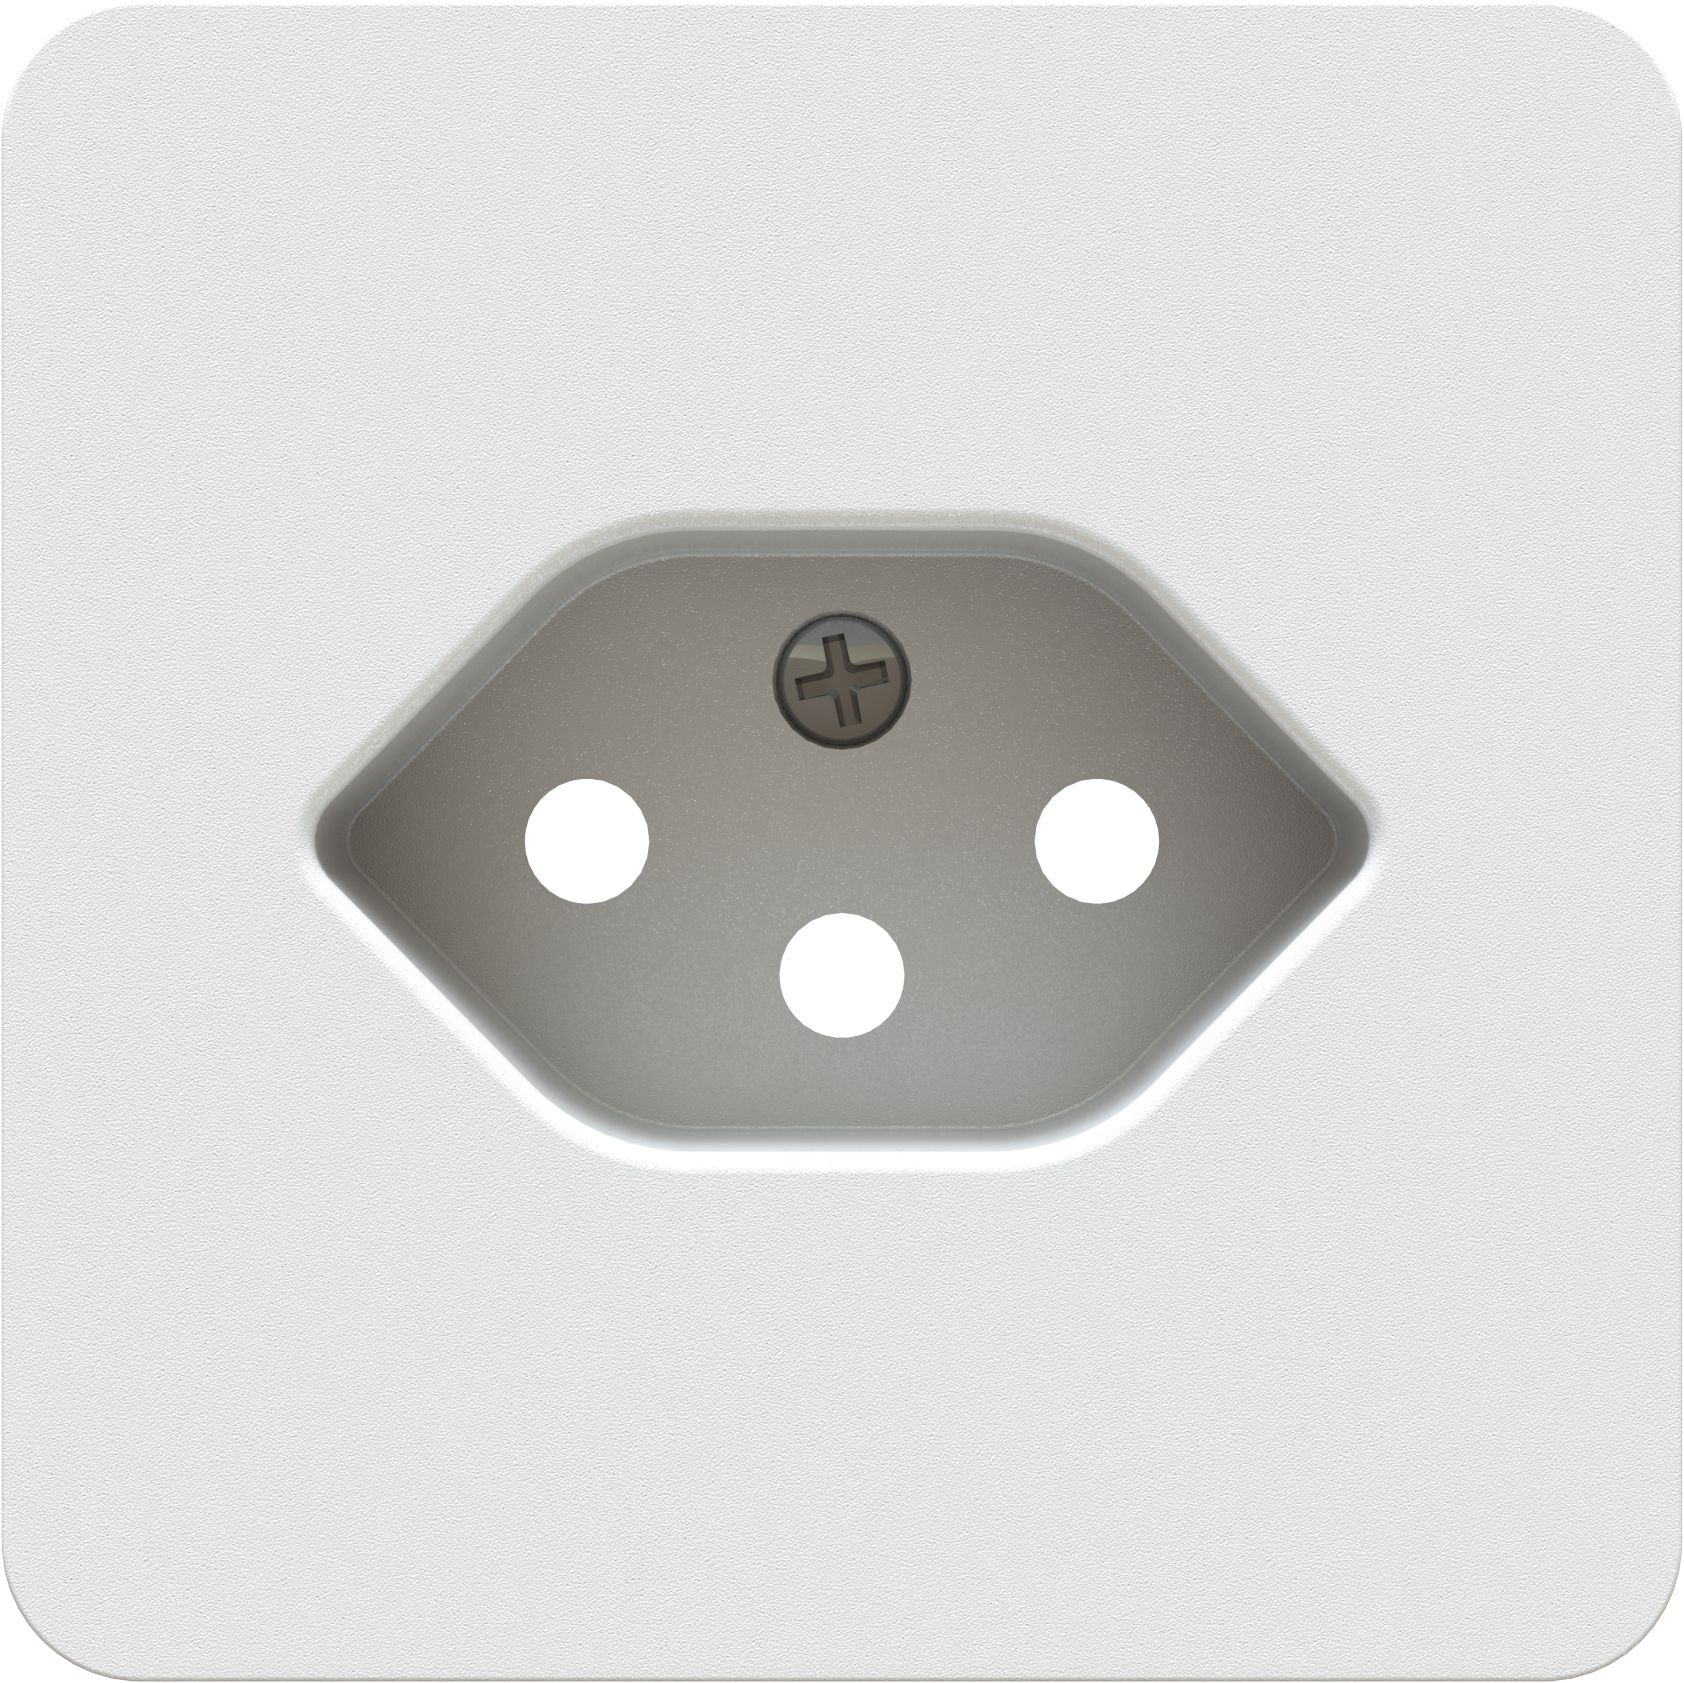 Central plate to wall socket 1x type 13 priamos white